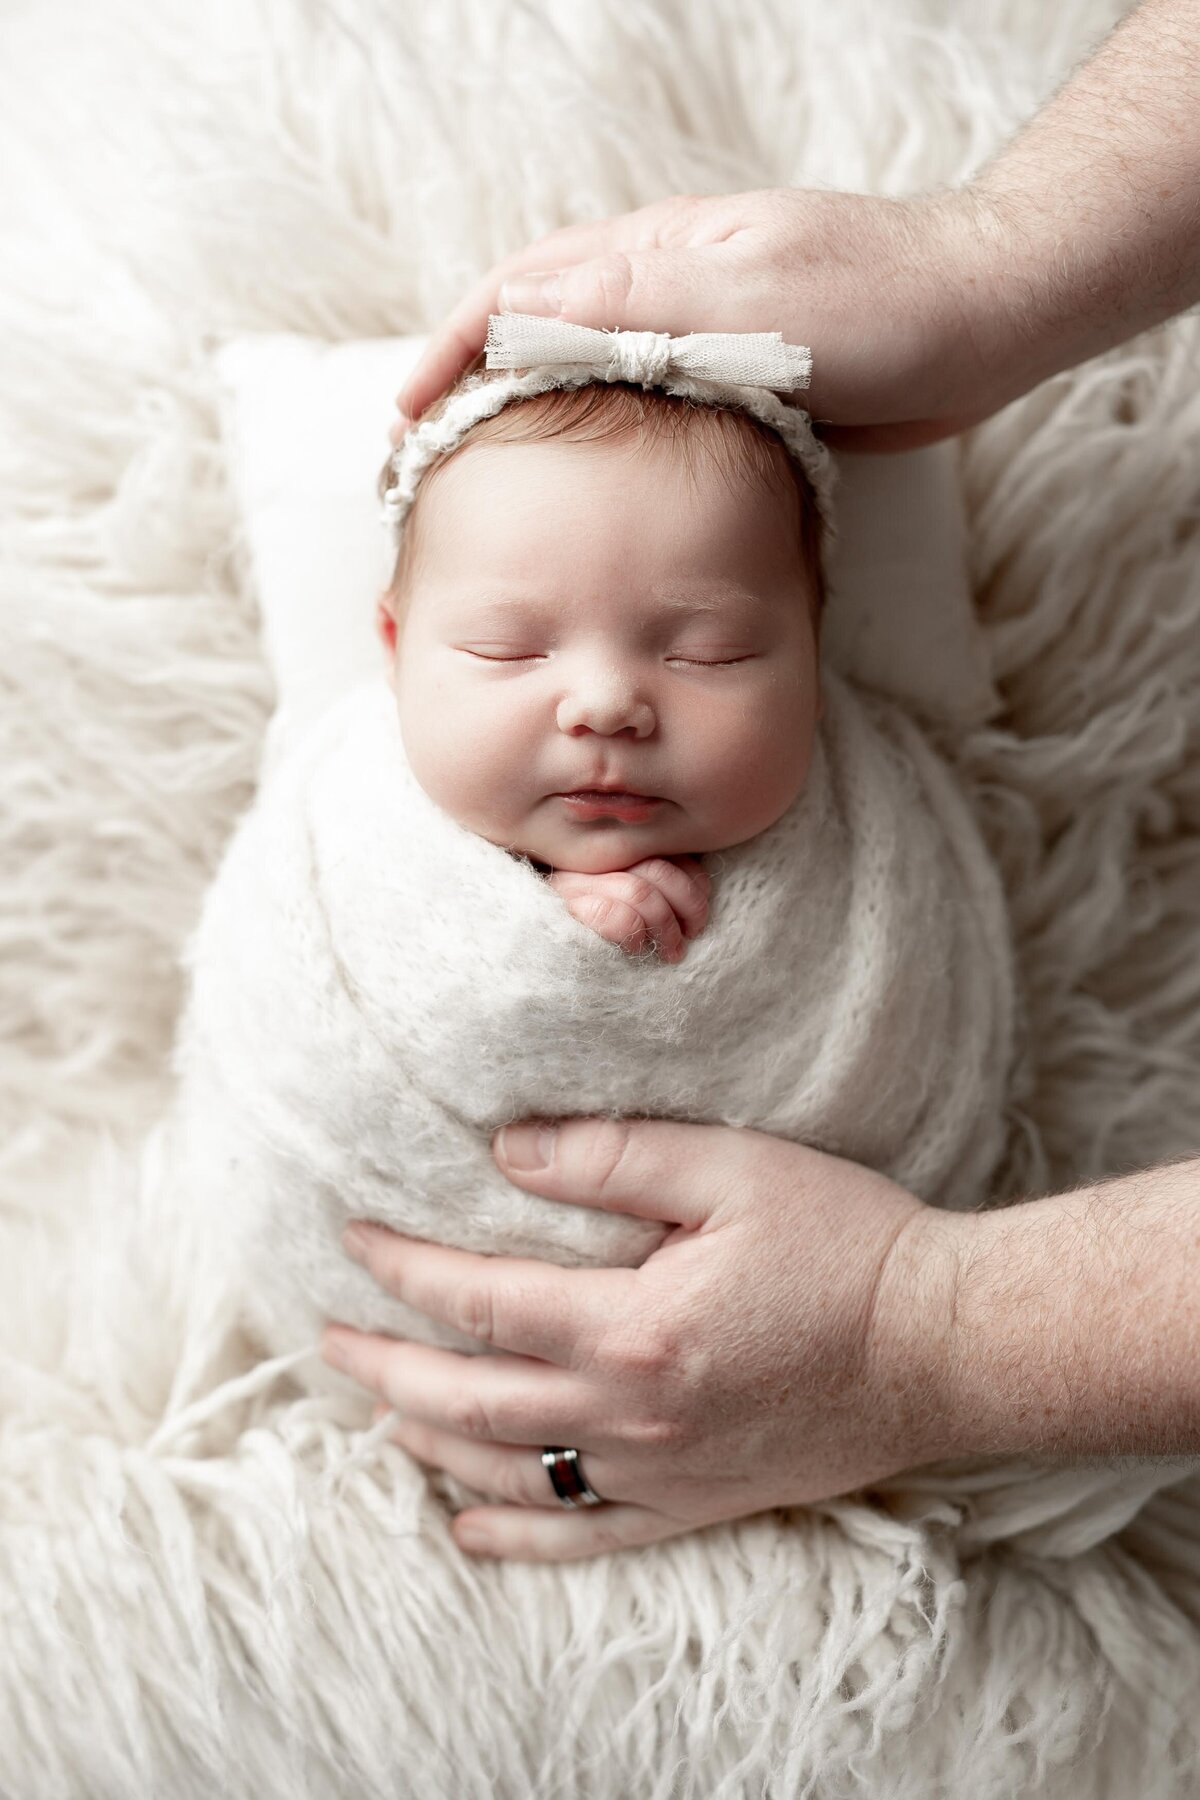 Studio newborn photography - sleeping baby swaddled in cream wrap with delicate bow headband. Dad's hands are gently resting on the bottom of the swaddle and the top of her head to show the scale of how small the baby is.